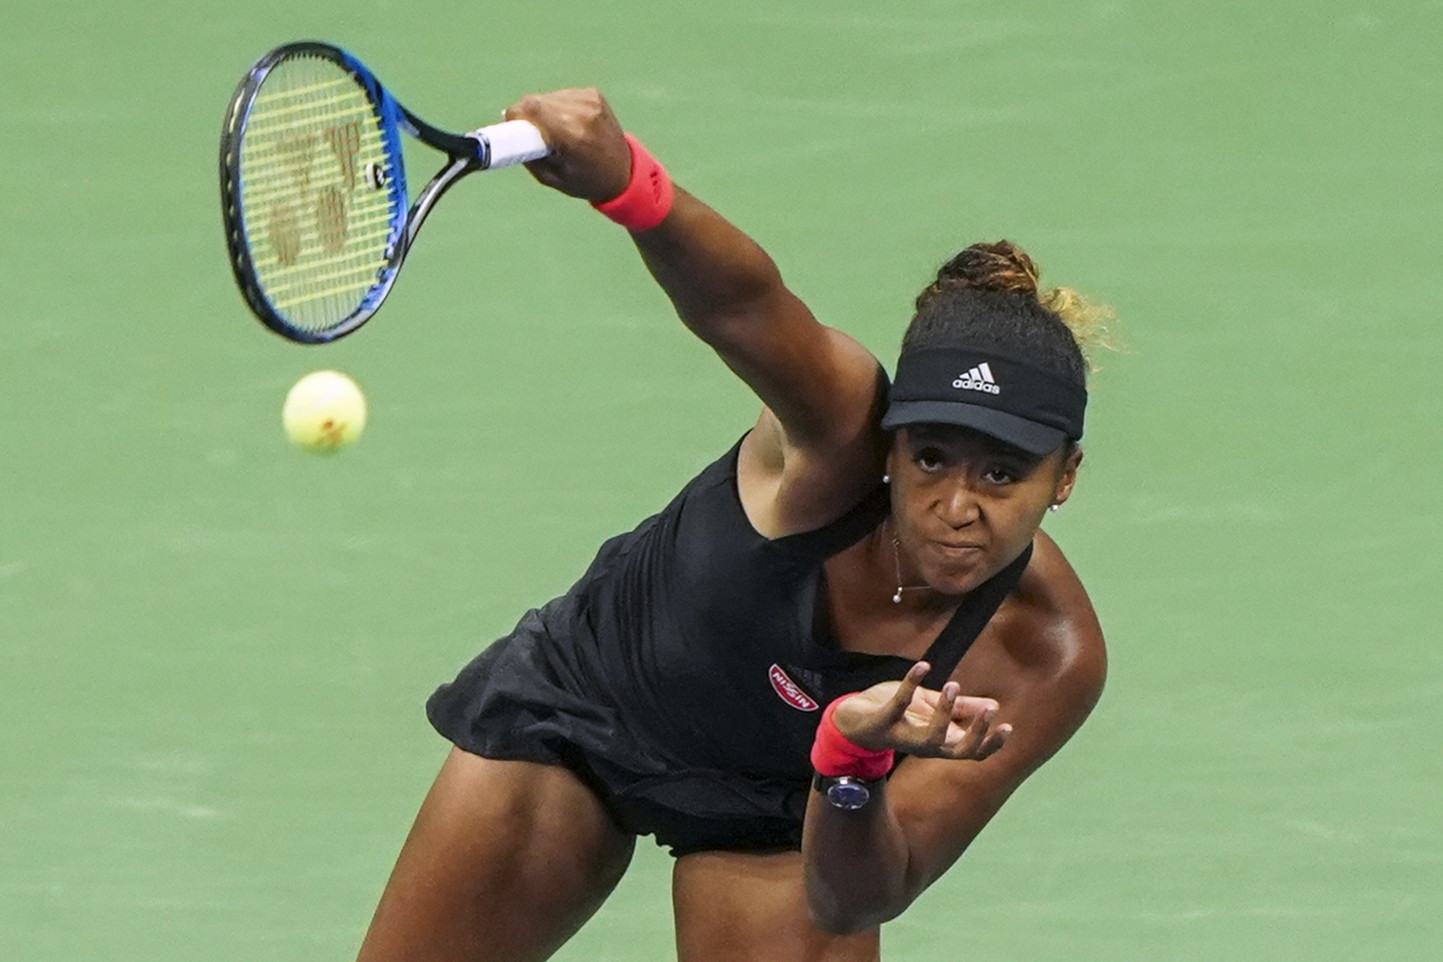 Naomi Osaka beat American Madison Keys to become the first Japanese woman to reach a Grand Slam singles final ©Getty Images